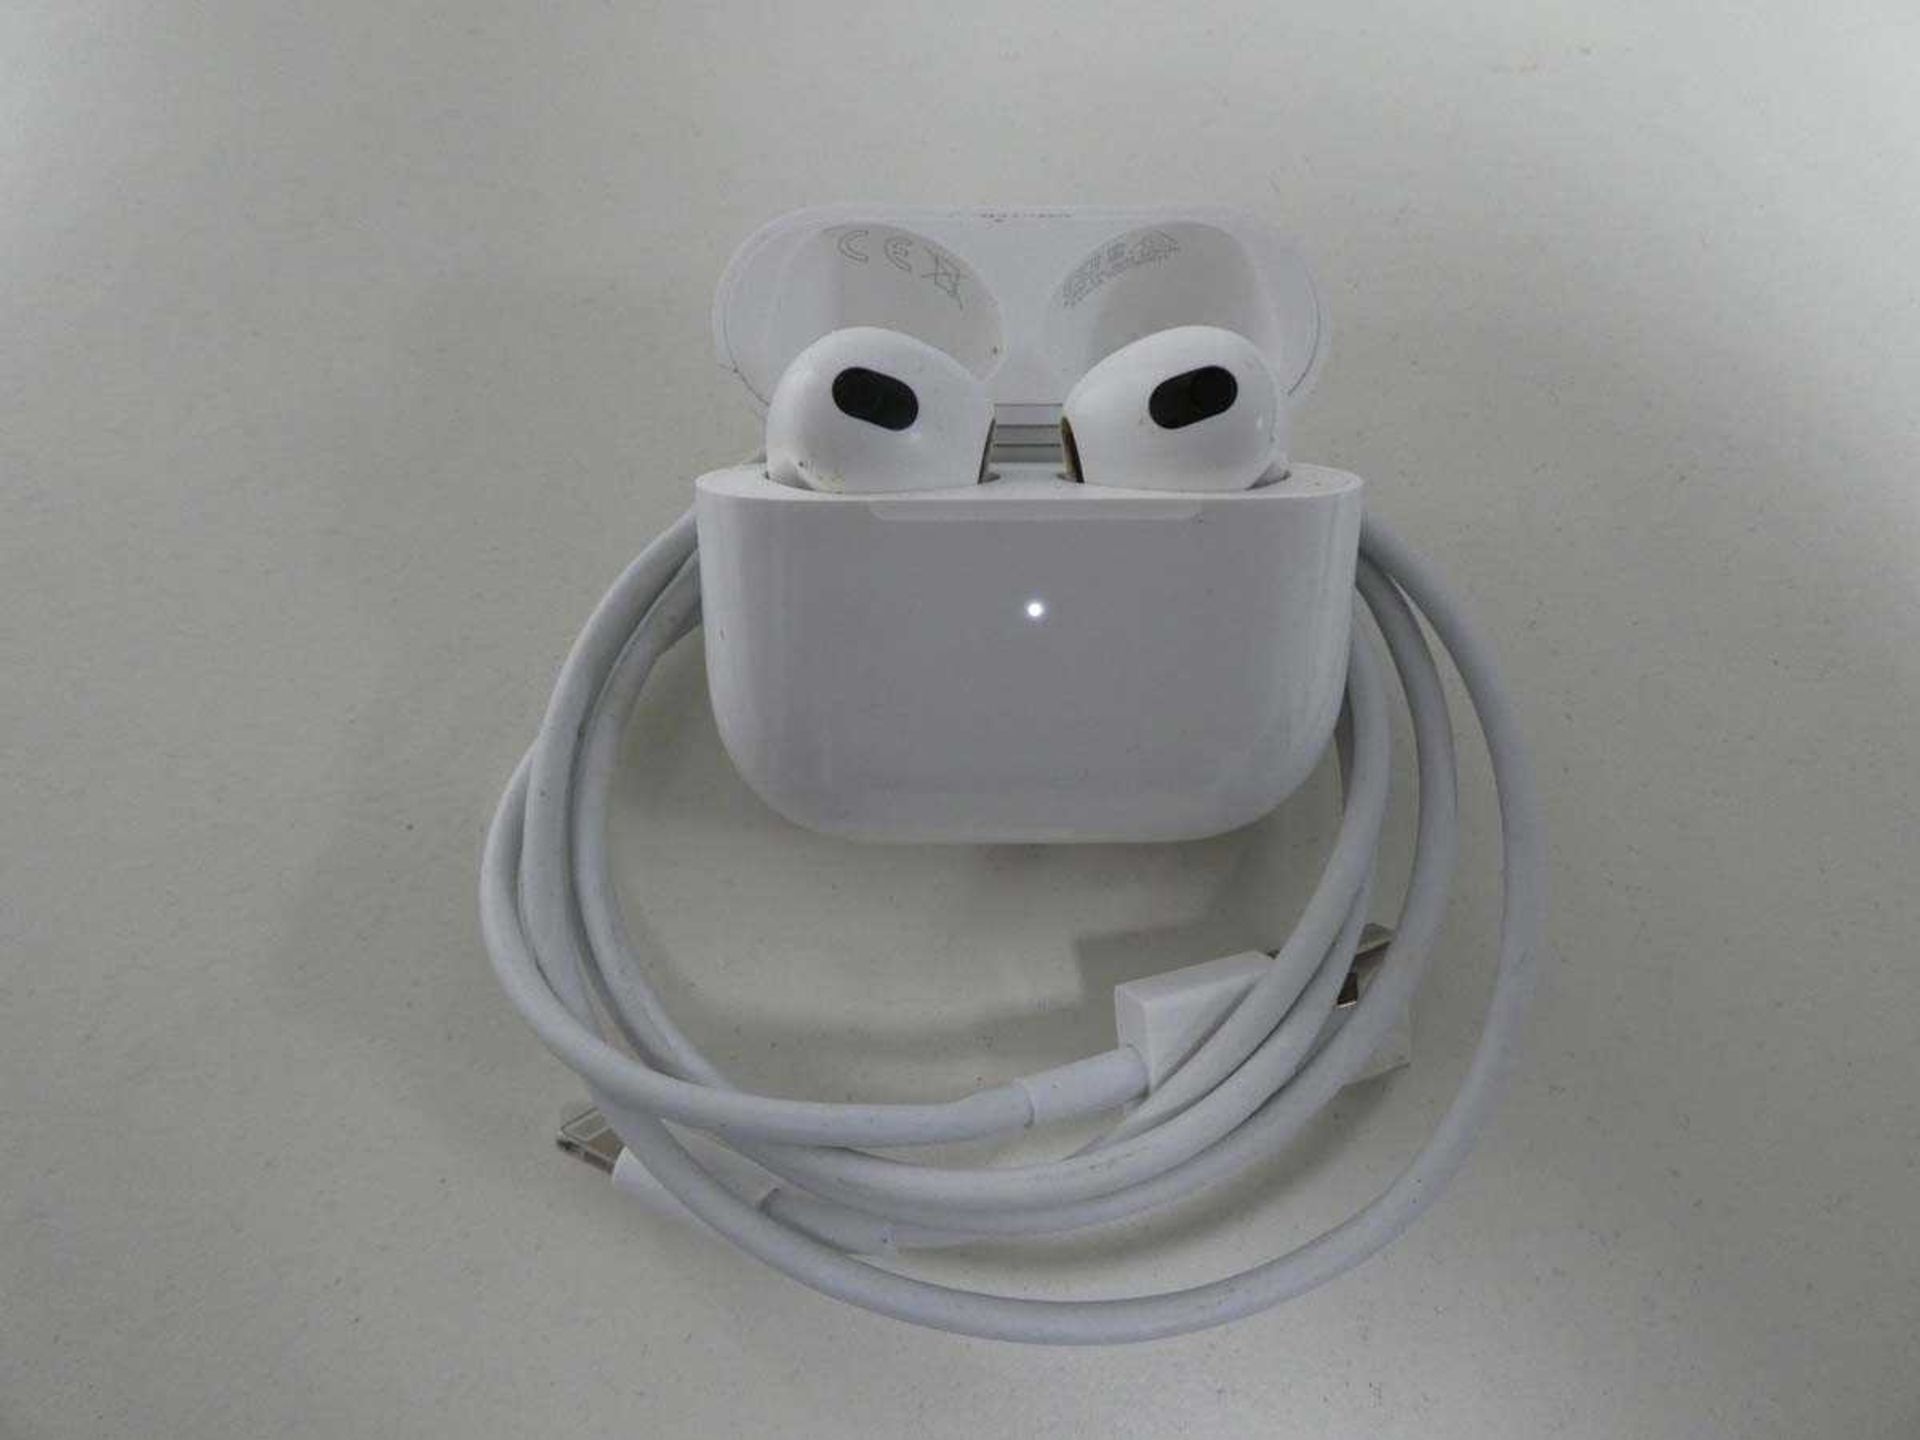 +VAT Unboxed pair of Apple AirPods with charging case and cable